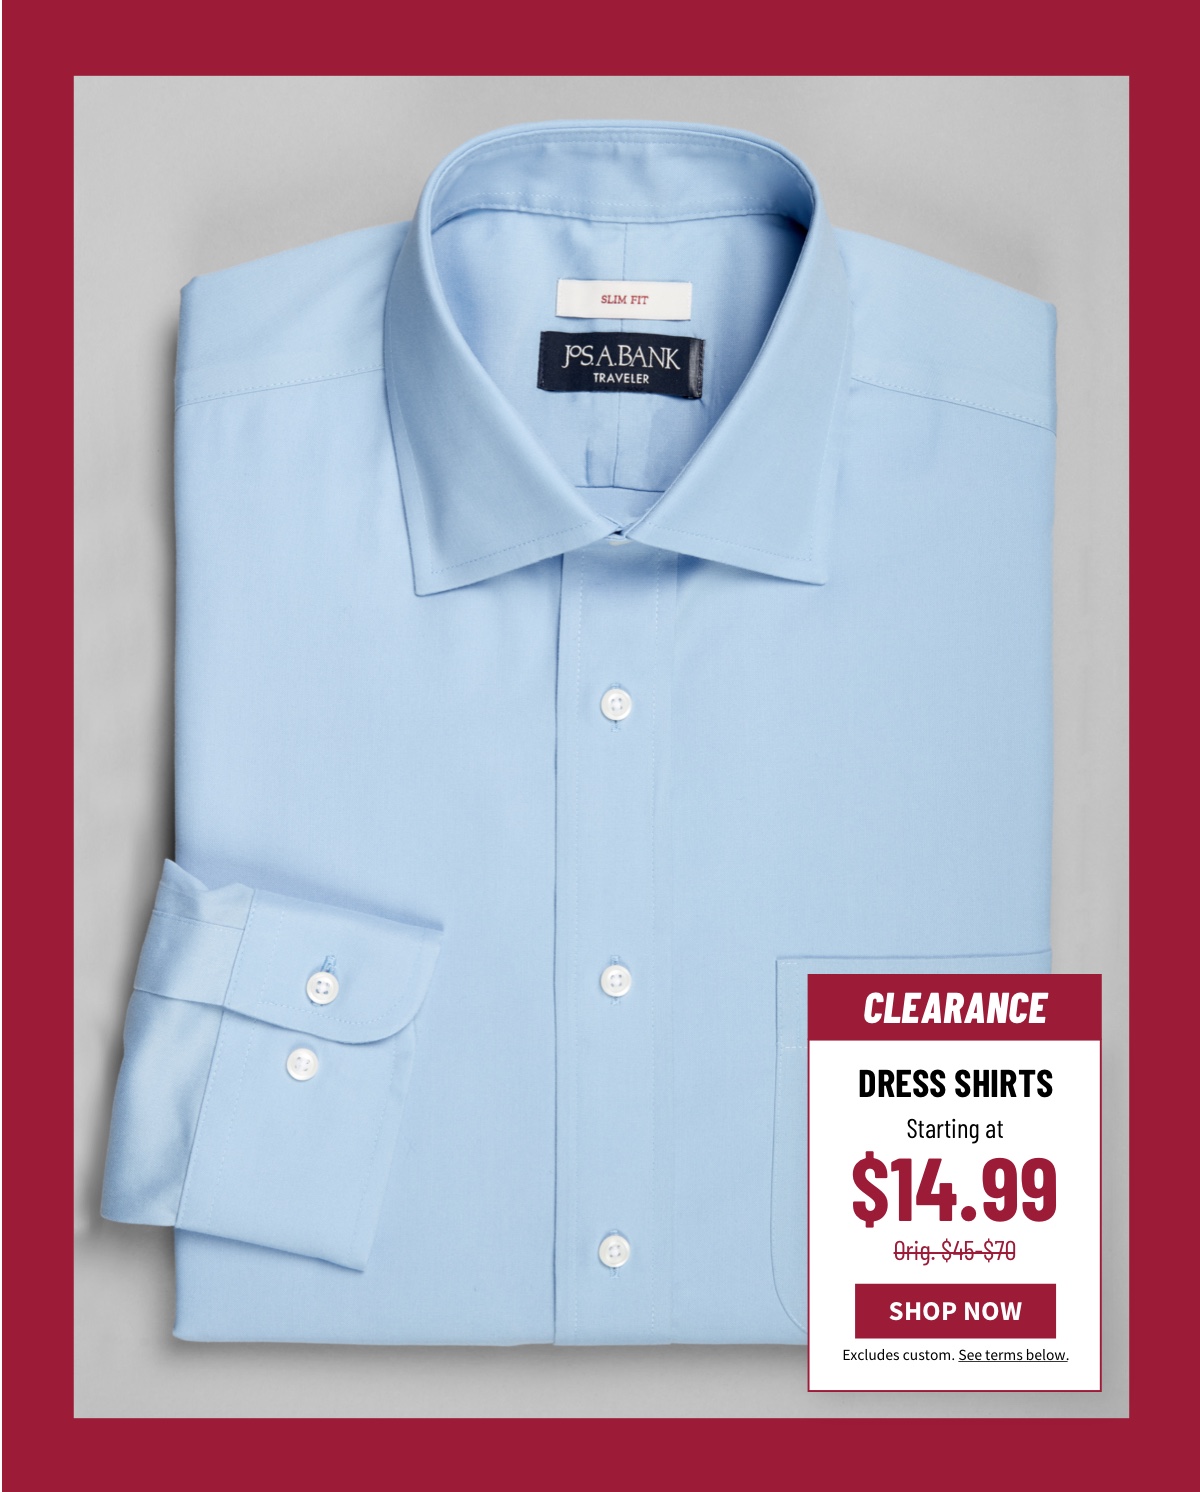 Clearance Dress Shirts Starting at $14.99 Orig. $4 -$70 Shop Now Excludes custom. See terms below.